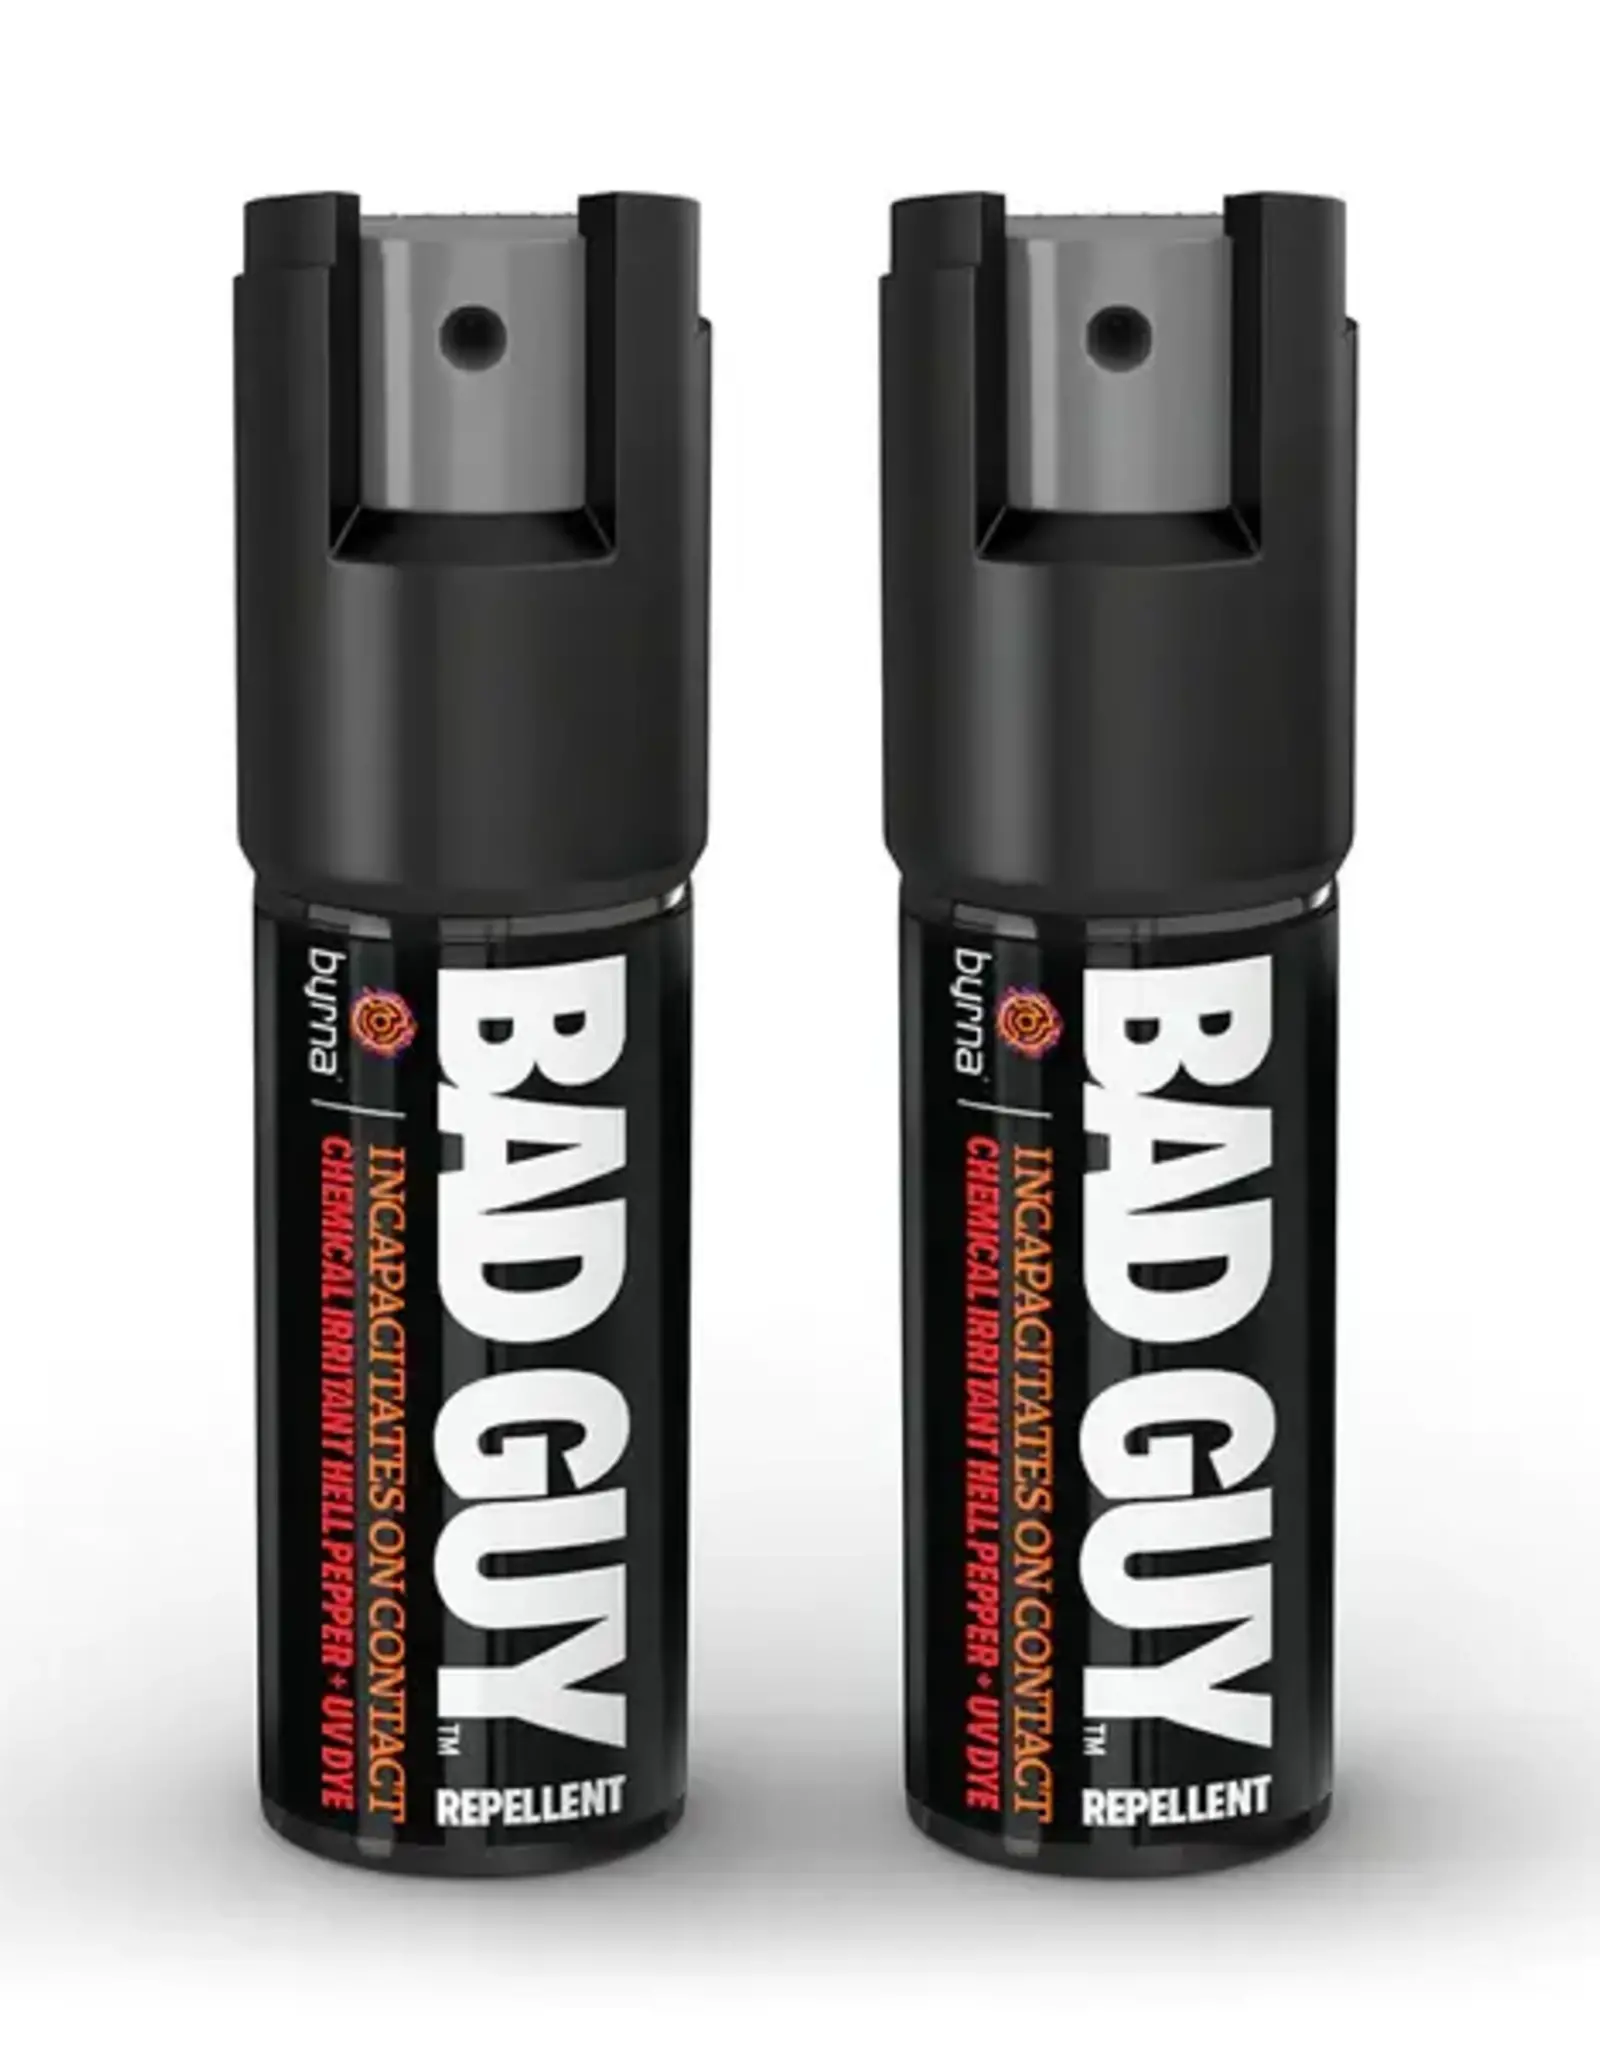 Byrna Byrna Bad Guy Repellent - Hell Pepper 0.5 oz (2ct)